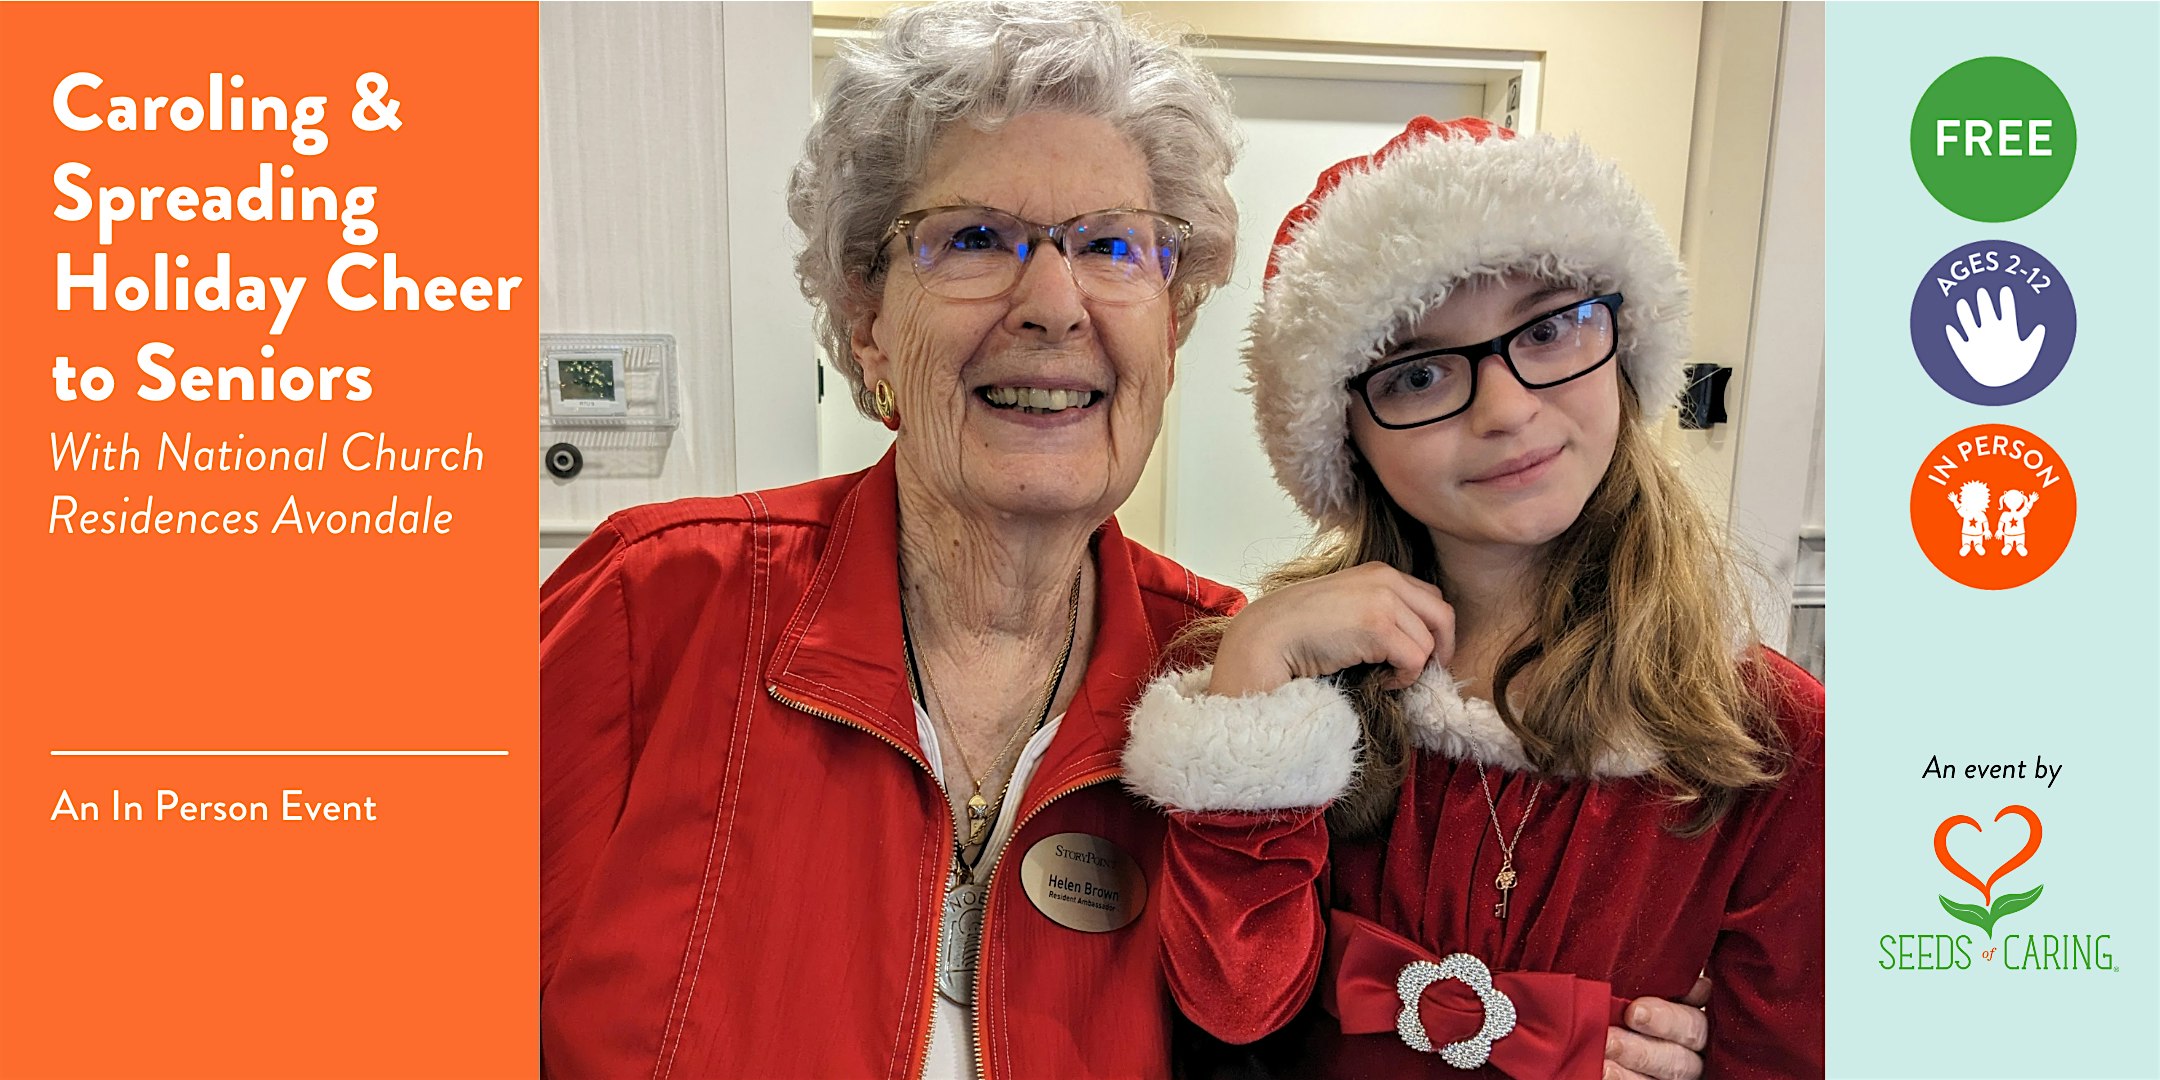 In Person: Caroling and Spreading Holiday Cheer to Seniors